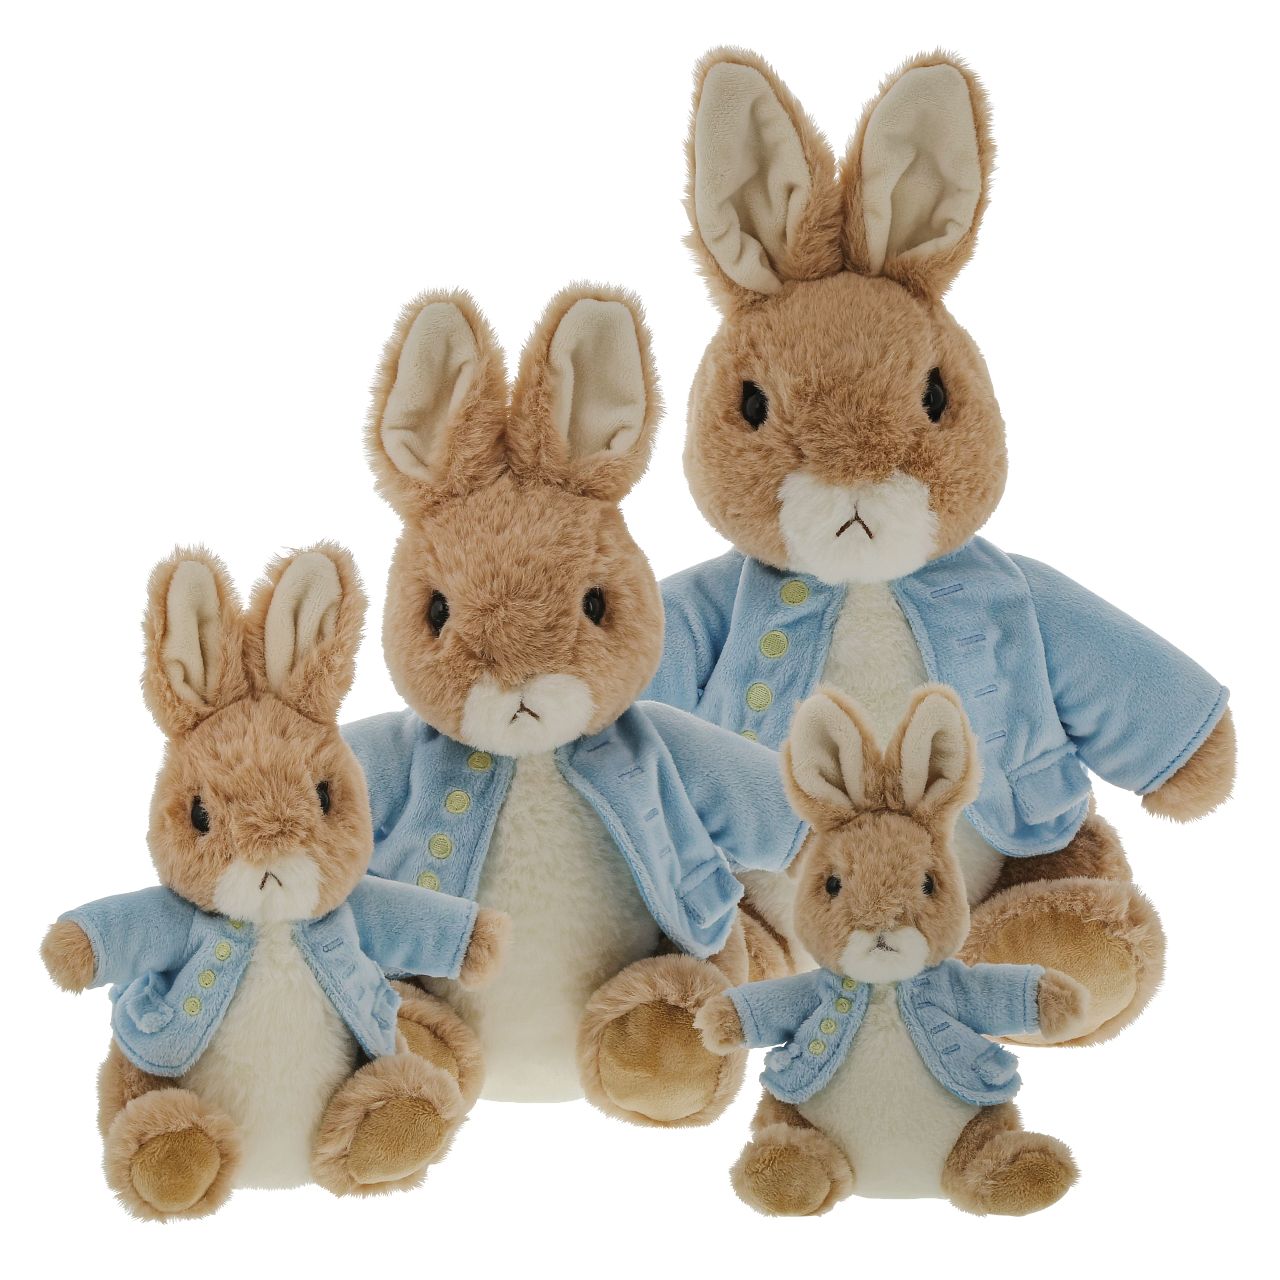 Beatrix Potter Peter Rabbit Extra Large Soft Toy  This Extra Large Peter Rabbit soft toy is even more huggable than the last. Peter Rabbit has been made from beautifully soft fabric and has been dressed in clothing exactly as illustrated by Beatrix Potter, with his signature blue jacket.